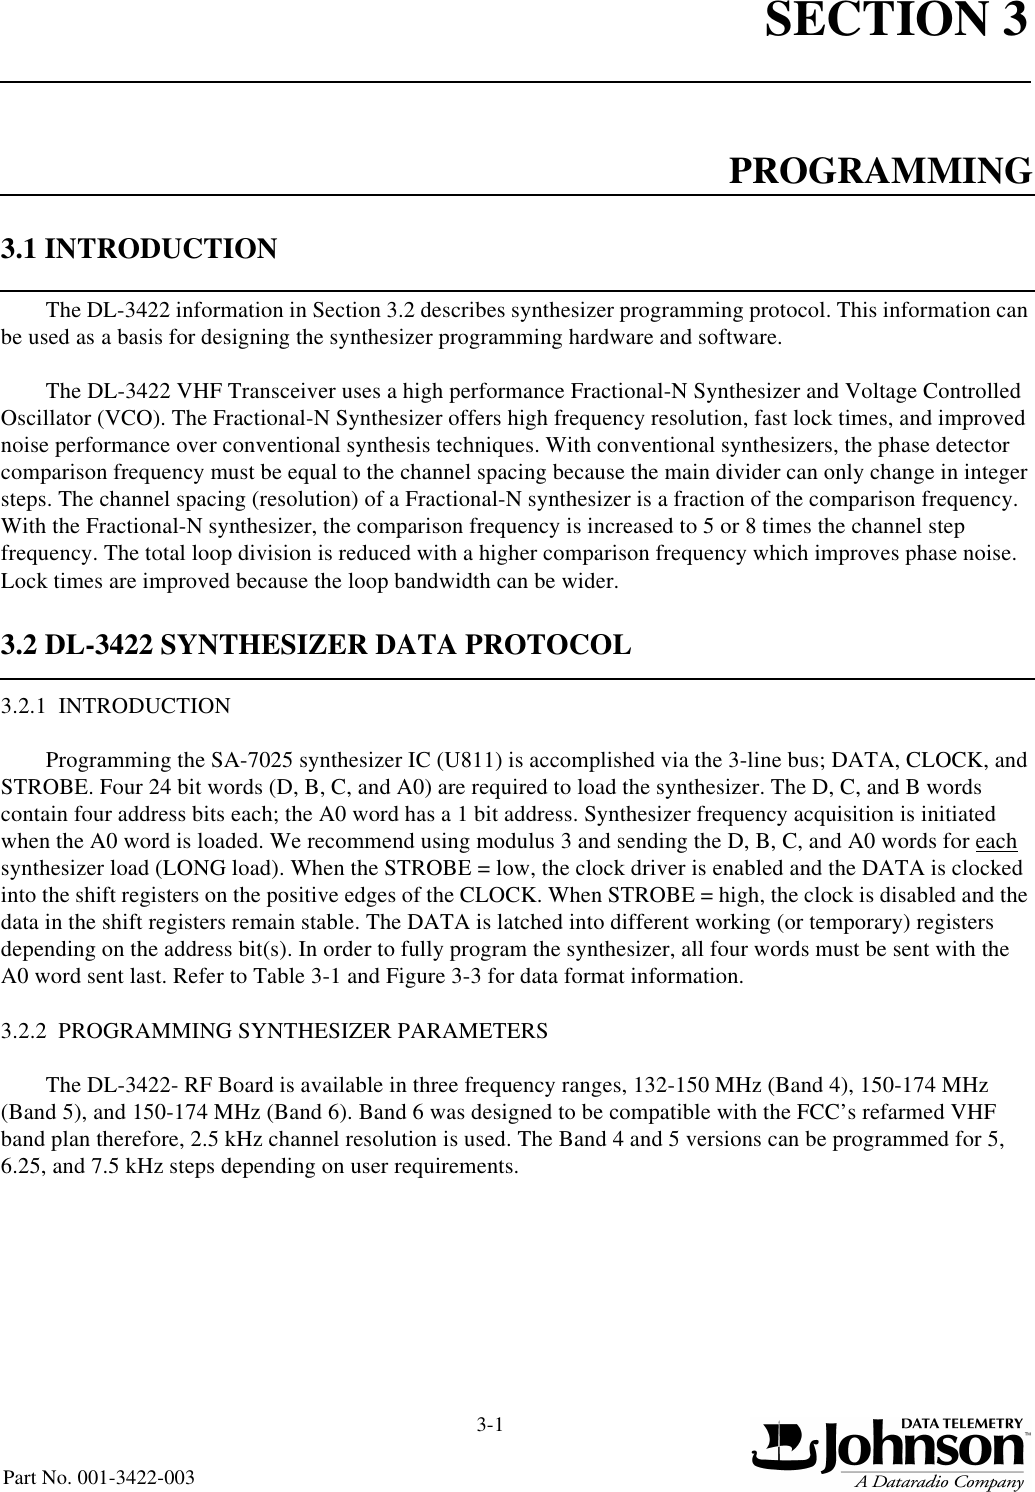 SECTION 33-1 Part No. 001-3422-003PROGRAMMING3.1 INTRODUCTIONThe DL-3422 information in Section 3.2 describes synthesizer programming protocol. This information can be used as a basis for designing the synthesizer programming hardware and software.The DL-3422 VHF Transceiver uses a high performance Fractional-N Synthesizer and Voltage Controlled Oscillator (VCO). The Fractional-N Synthesizer offers high frequency resolution, fast lock times, and improved noise performance over conventional synthesis techniques. With conventional synthesizers, the phase detector comparison frequency must be equal to the channel spacing because the main divider can only change in integer steps. The channel spacing (resolution) of a Fractional-N synthesizer is a fraction of the comparison frequency. With the Fractional-N synthesizer, the comparison frequency is increased to 5 or 8 times the channel step frequency. The total loop division is reduced with a higher comparison frequency which improves phase noise. Lock times are improved because the loop bandwidth can be wider.3.2 DL-3422 SYNTHESIZER DATA PROTOCOL3.2.1  INTRODUCTIONProgramming the SA-7025 synthesizer IC (U811) is accomplished via the 3-line bus; DATA, CLOCK, and STROBE. Four 24 bit words (D, B, C, and A0) are required to load the synthesizer. The D, C, and B words contain four address bits each; the A0 word has a 1 bit address. Synthesizer frequency acquisition is initiated when the A0 word is loaded. We recommend using modulus 3 and sending the D, B, C, and A0 words for each synthesizer load (LONG load). When the STROBE = low, the clock driver is enabled and the DATA is clocked into the shift registers on the positive edges of the CLOCK. When STROBE = high, the clock is disabled and the data in the shift registers remain stable. The DATA is latched into different working (or temporary) registers depending on the address bit(s). In order to fully program the synthesizer, all four words must be sent with the A0 word sent last. Refer to Table 3-1 and Figure 3-3 for data format information.3.2.2  PROGRAMMING SYNTHESIZER PARAMETERSThe DL-3422- RF Board is available in three frequency ranges, 132-150 MHz (Band 4), 150-174 MHz (Band 5), and 150-174 MHz (Band 6). Band 6 was designed to be compatible with the FCC’s refarmed VHF band plan therefore, 2.5 kHz channel resolution is used. The Band 4 and 5 versions can be programmed for 5, 6.25, and 7.5 kHz steps depending on user requirements.